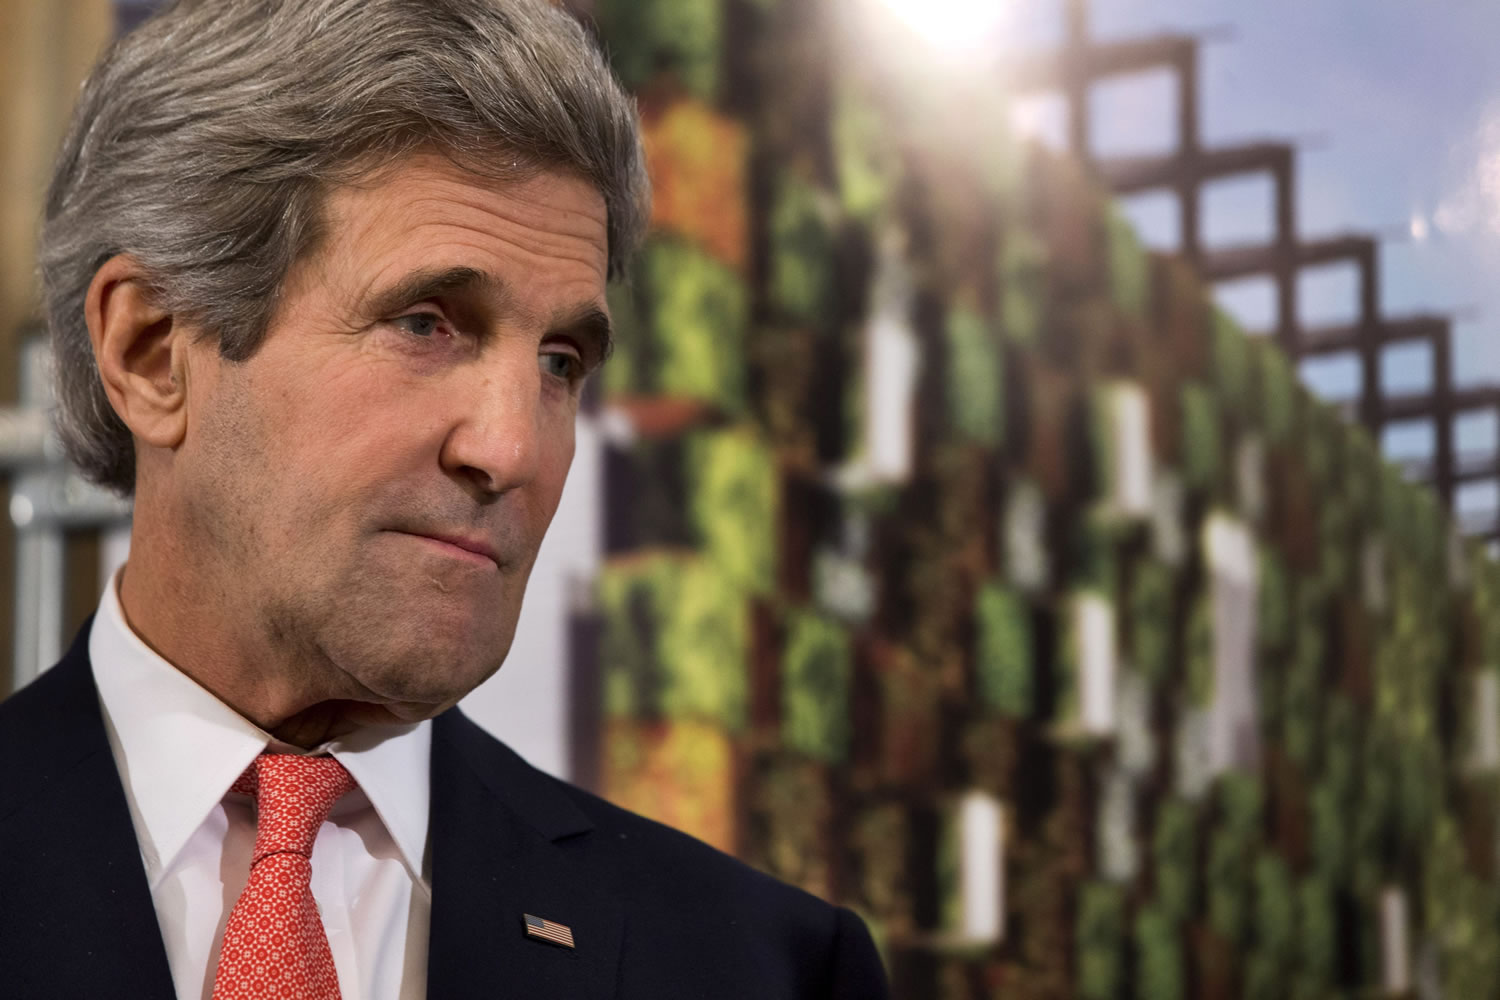 In this March 27, 2014, photo, Secretary of State John Kerry attends a reception for U.S. companies based in Italy that are donors and potential donors for a USA Pavillion at the Milan Expo 2015, in Rome. Halfway home from Saudi Arabia, Kerry has abruptly changed course and will stay in Europe for talks on Ukraine. Flying from Riyadh to Shannon, Ireland, for a refueling stop on Saturday, Kerry decided to turn his plane around and will now travel to Paris for a meeting with Russian Foreign Minister Sergey Lavrov, likely on Monday.